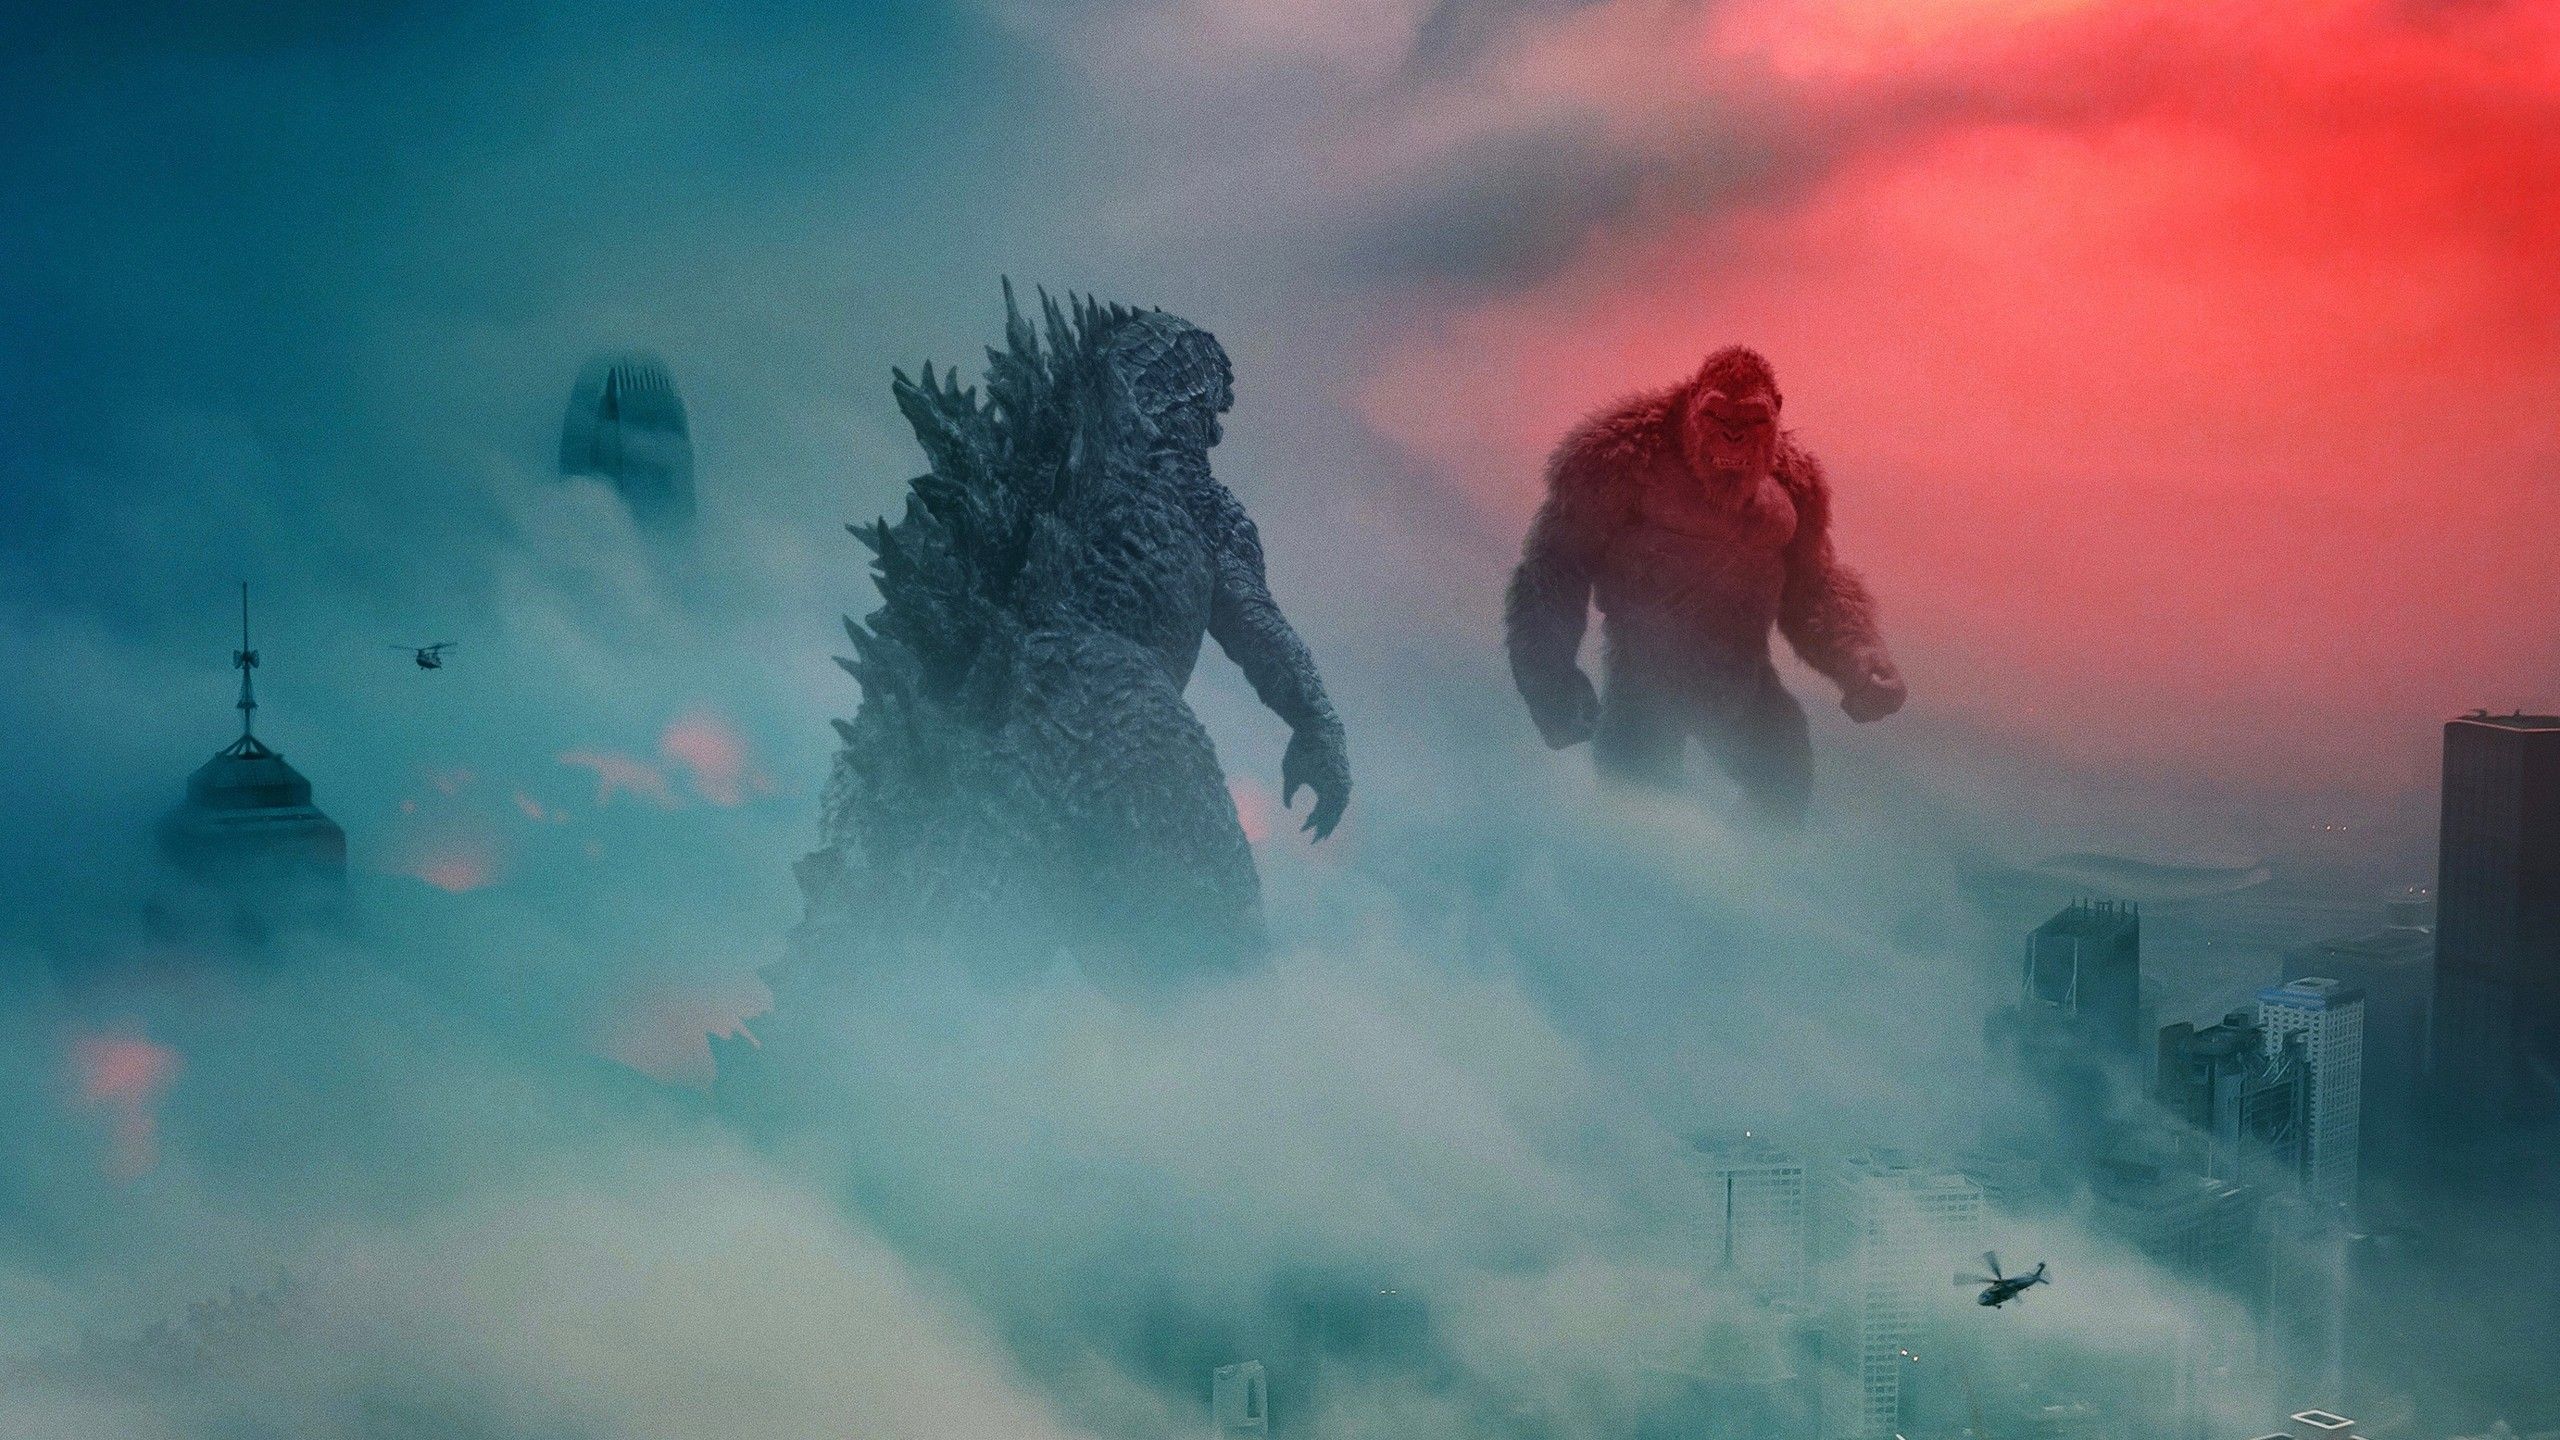 grycalgrass: Godzilla Vs Kong Wallpaper / Godzilla Vs Kong Wallpaper 4k 640x400 Download HD Wallpapertip and posts related to new films are regarded as spoilers until digital and home release